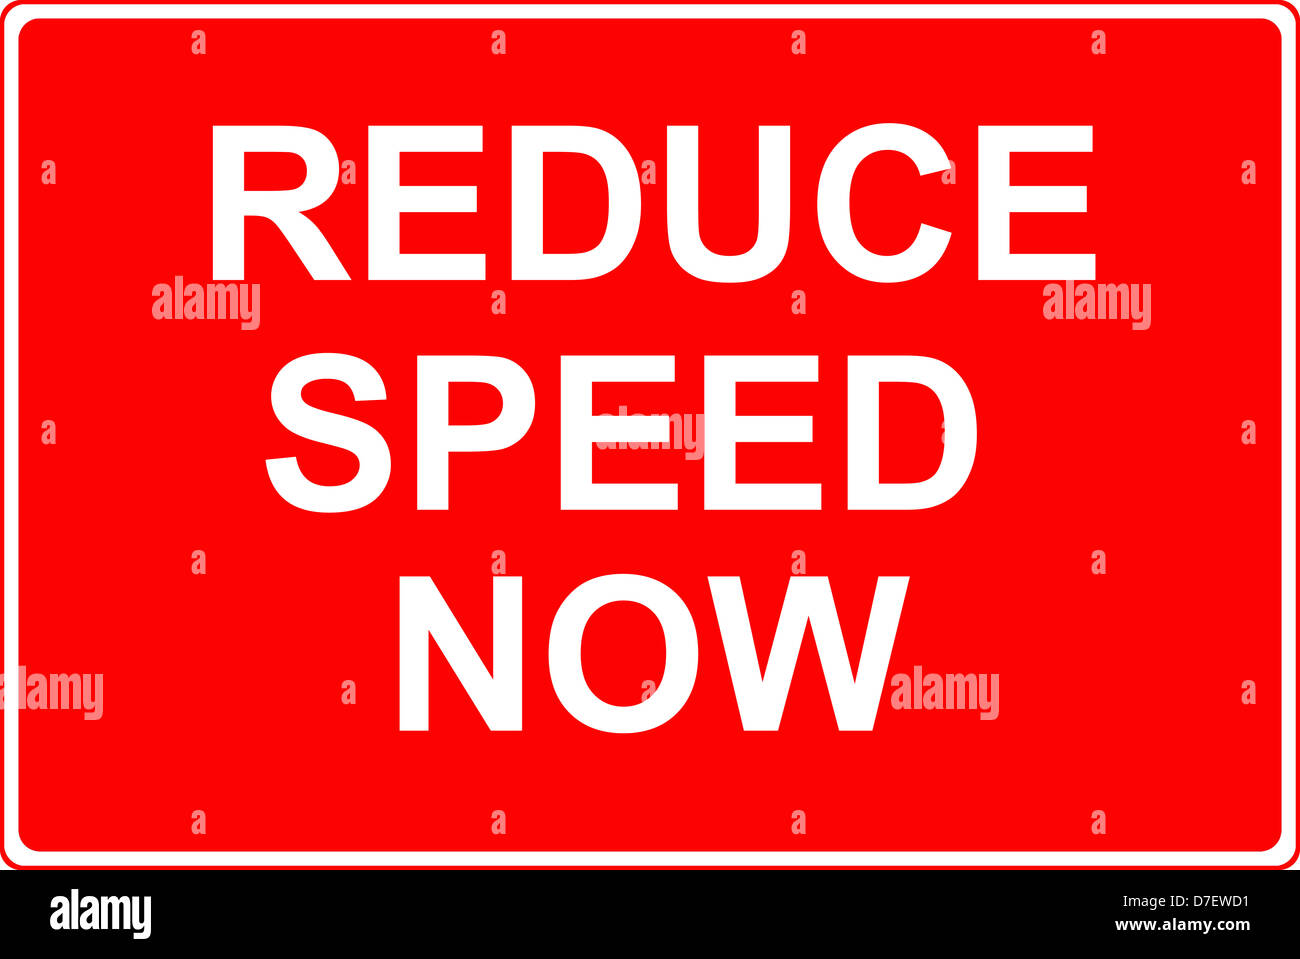 Reduce speed now to prevent accidents road sign Stock Photo